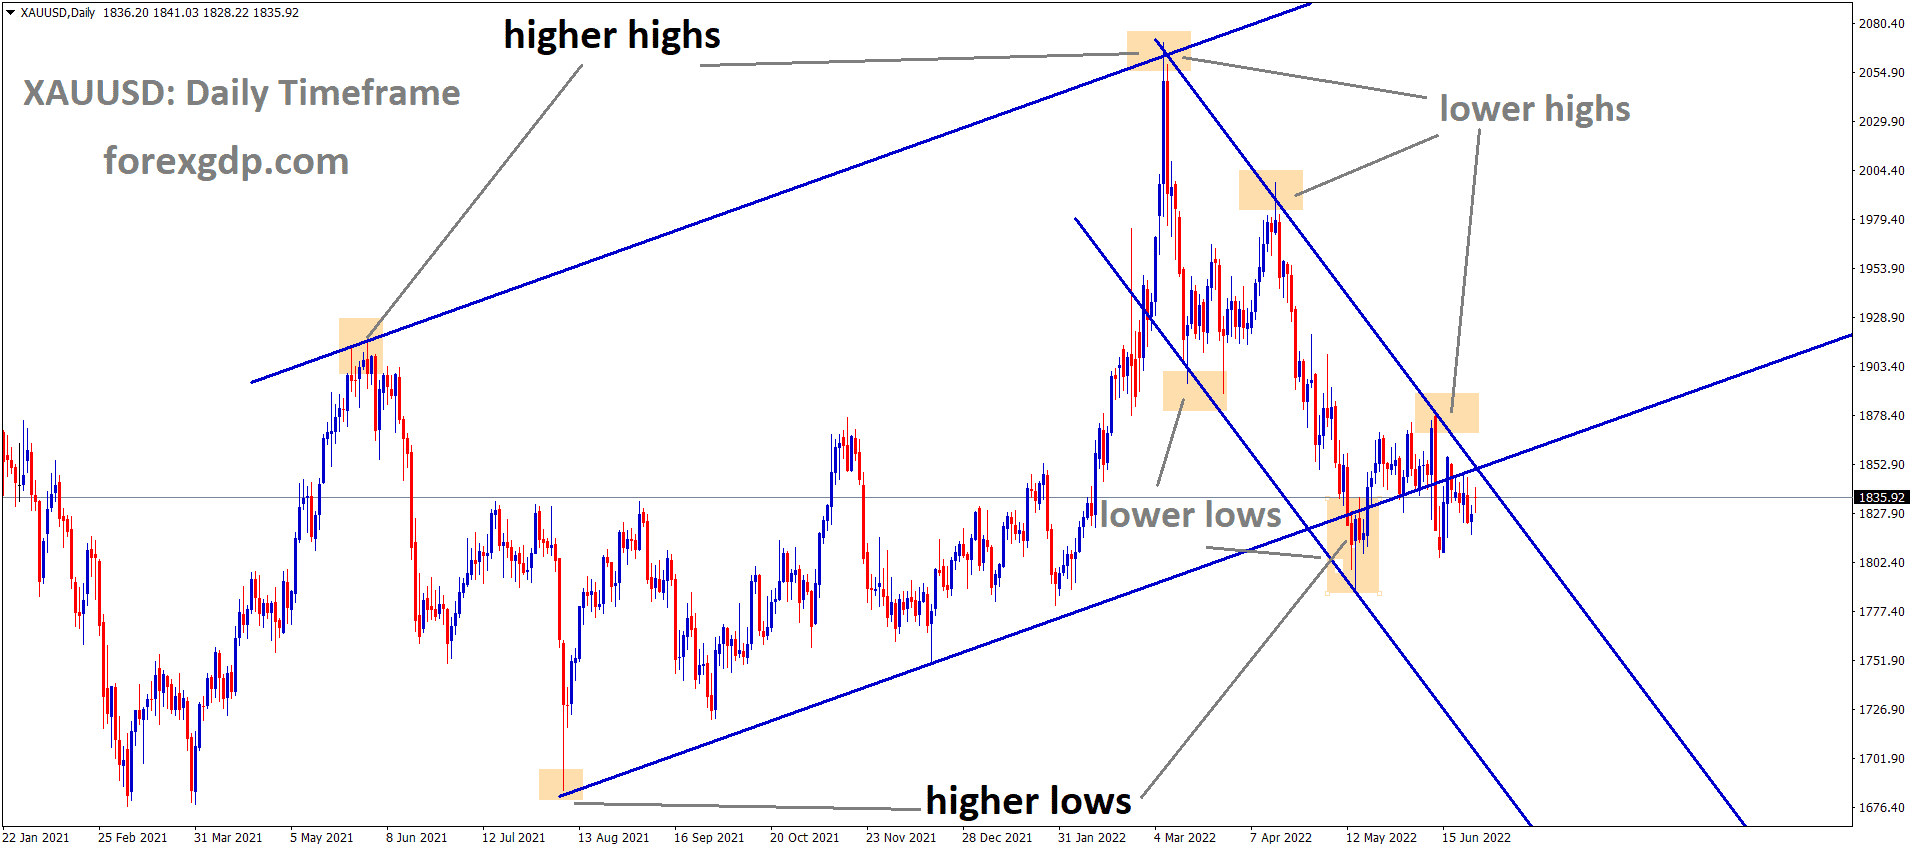 XAUUSD Daily Time Frame Analysis Market is moving in an Ascending channel and the Market has reached the Higher low area of the channel